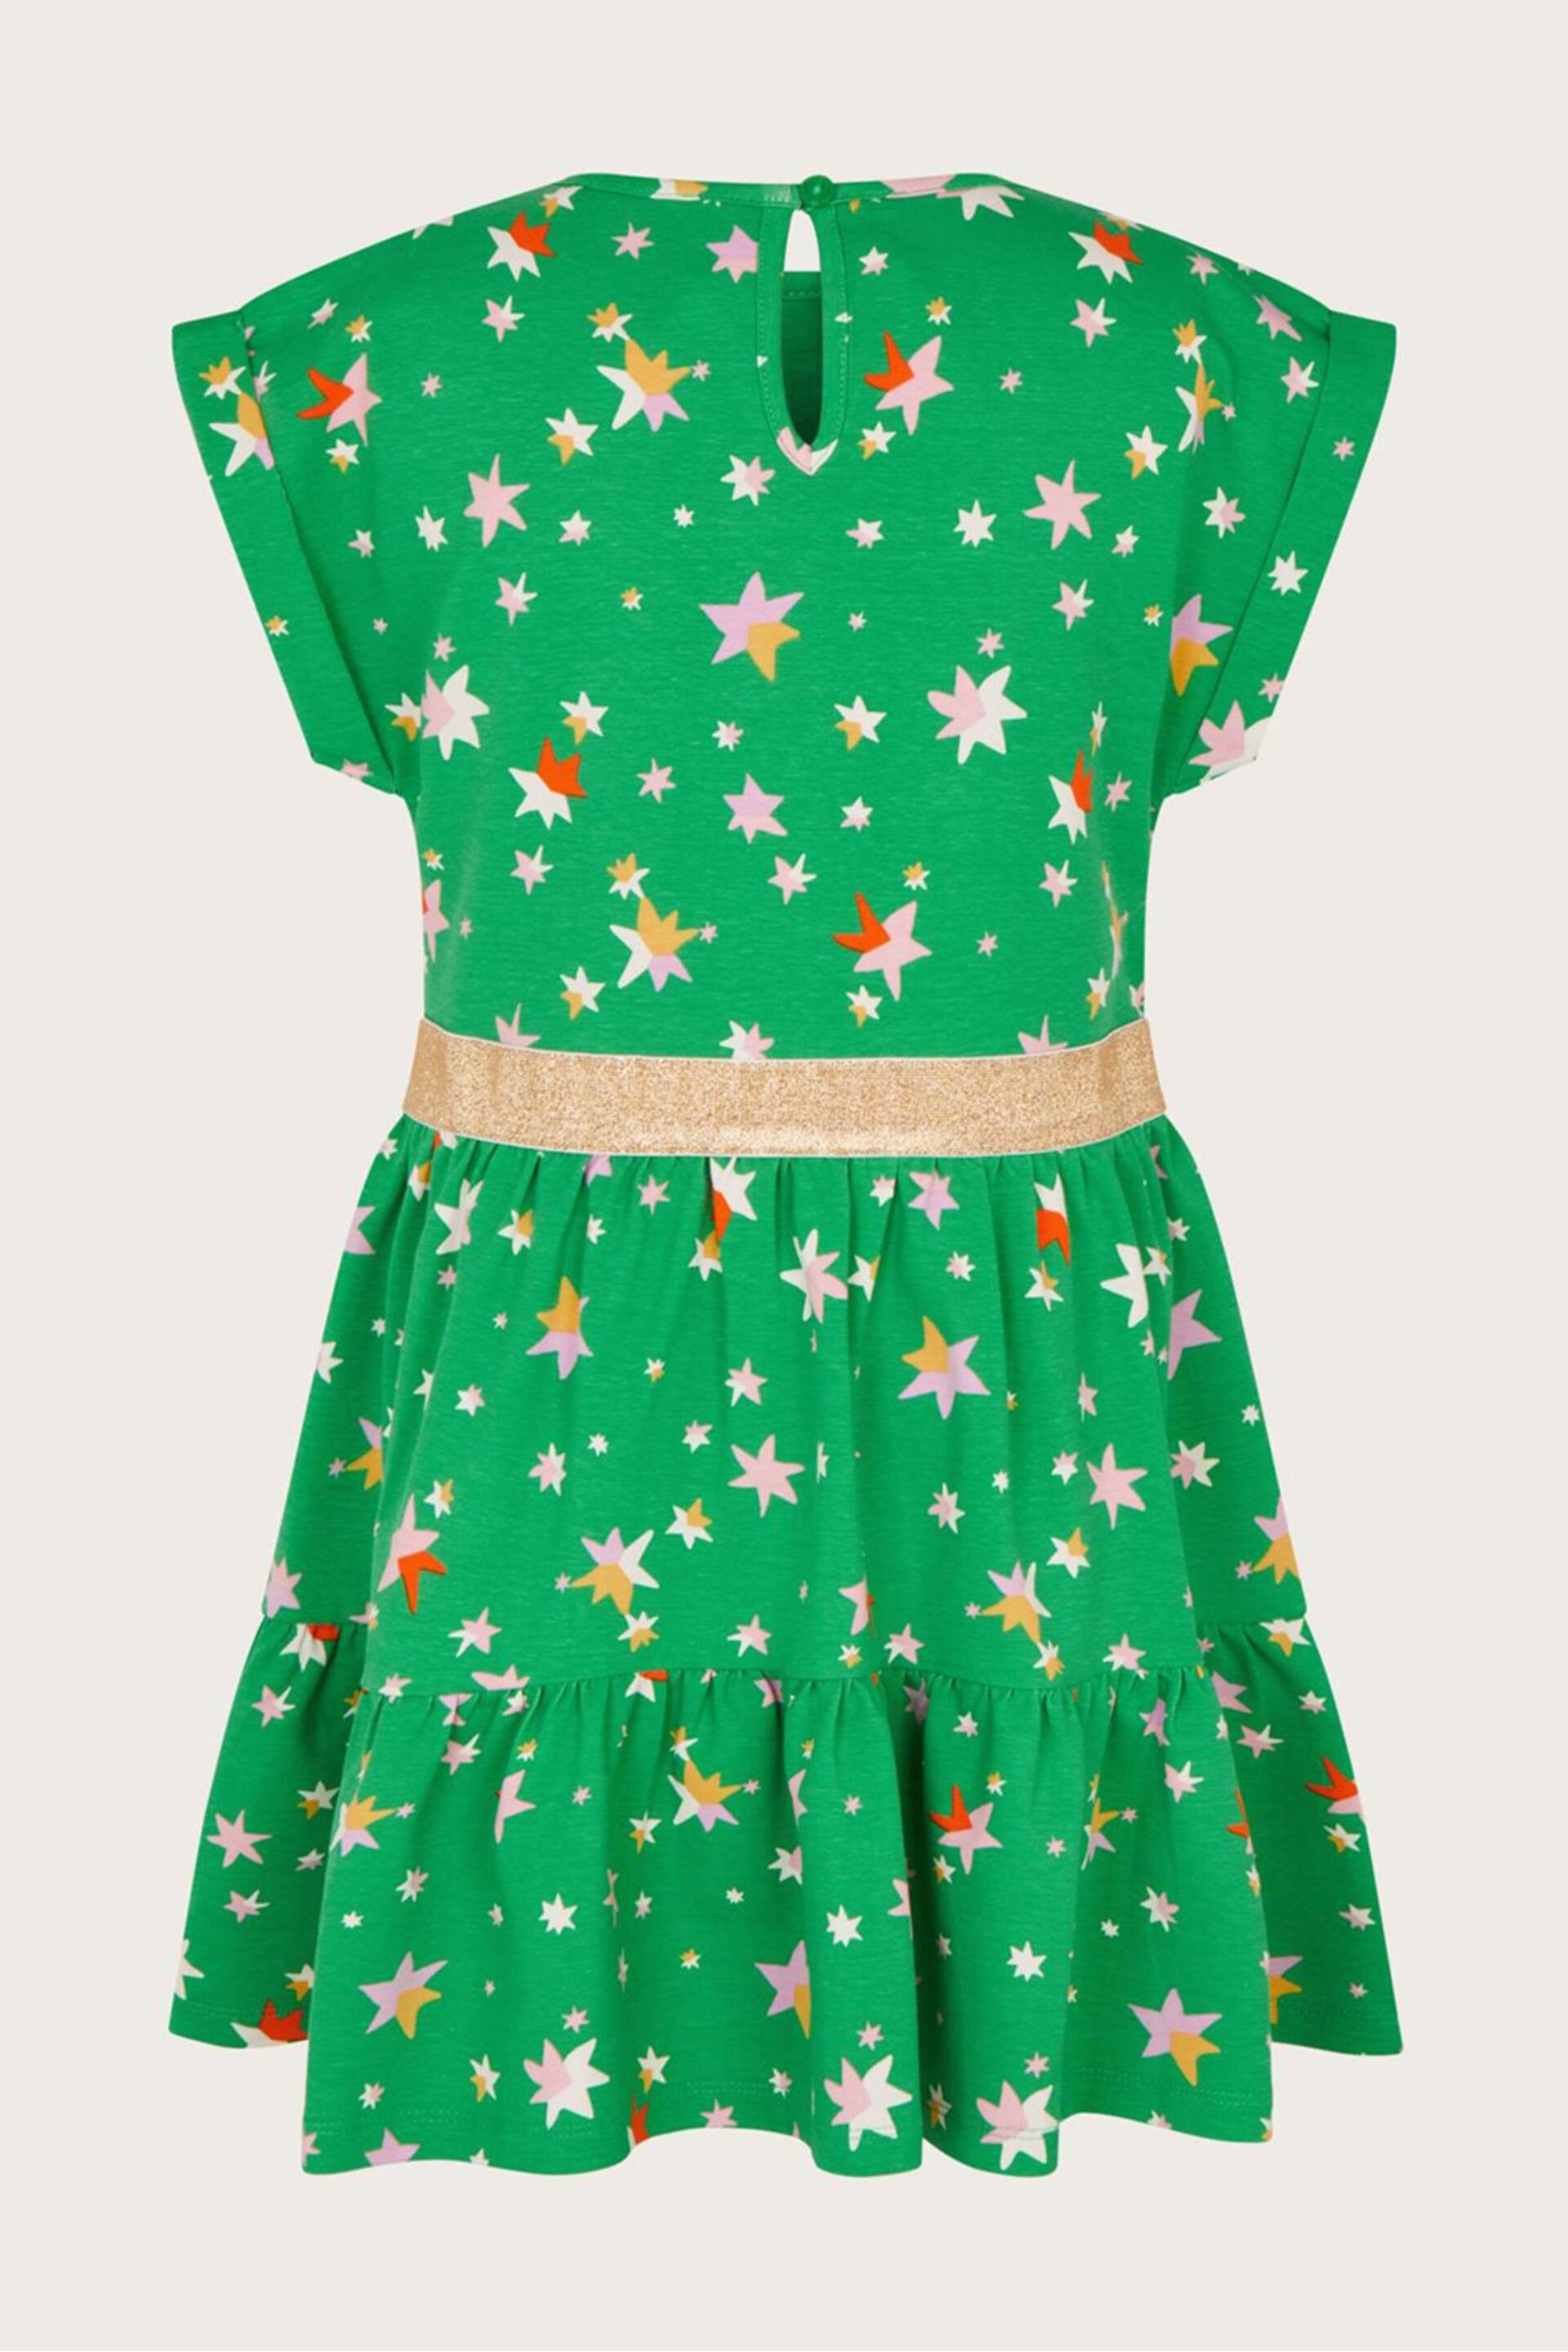 Monsoon Green Stacey Star Dress - Image 2 of 3